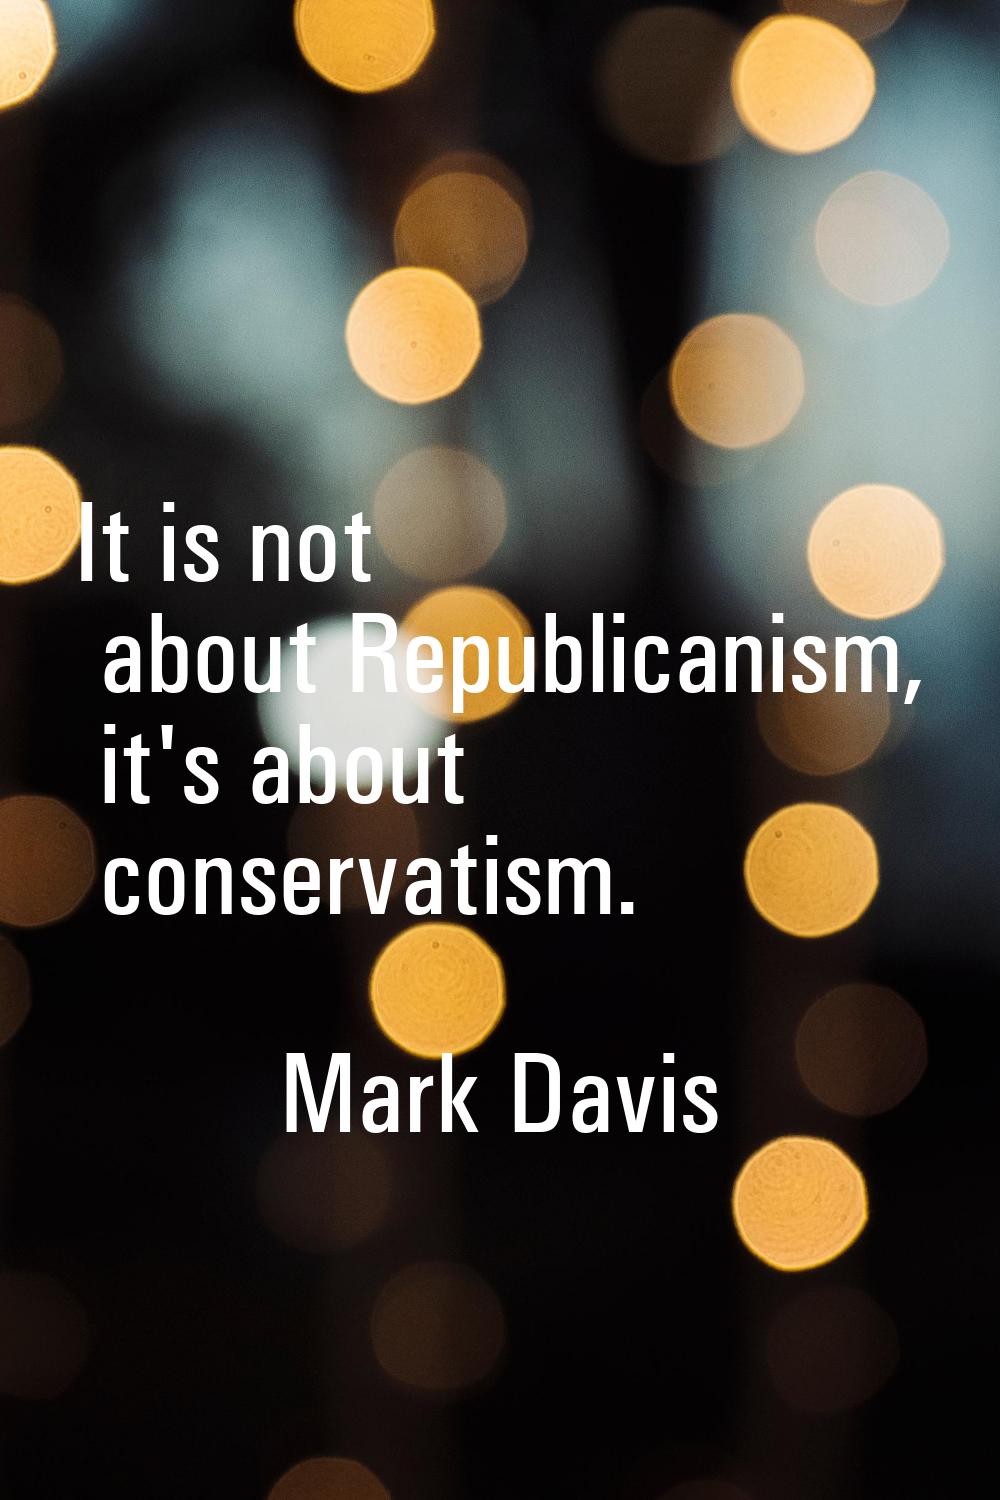 It is not about Republicanism, it's about conservatism.